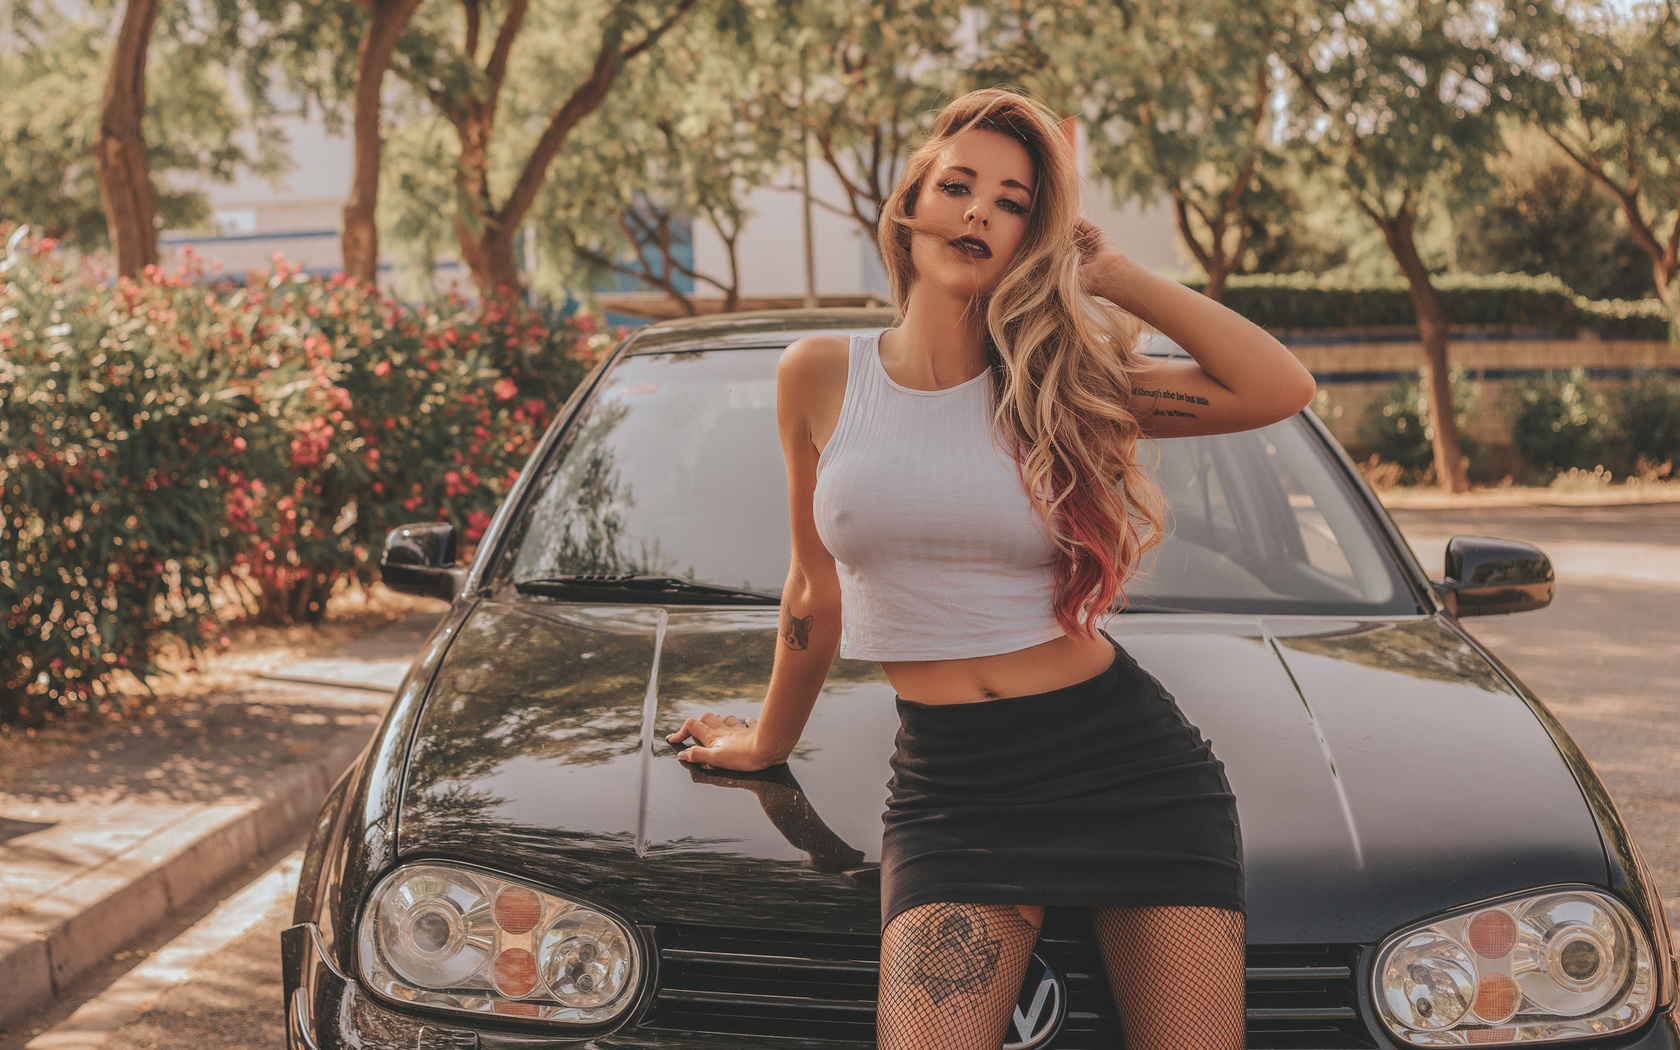 women, blonde, tanned, skirt, belly, fishnet stockings, women with cars, nipple through clothing, dyed hair, tattoo, depth of field, car, women outdoors, portrait